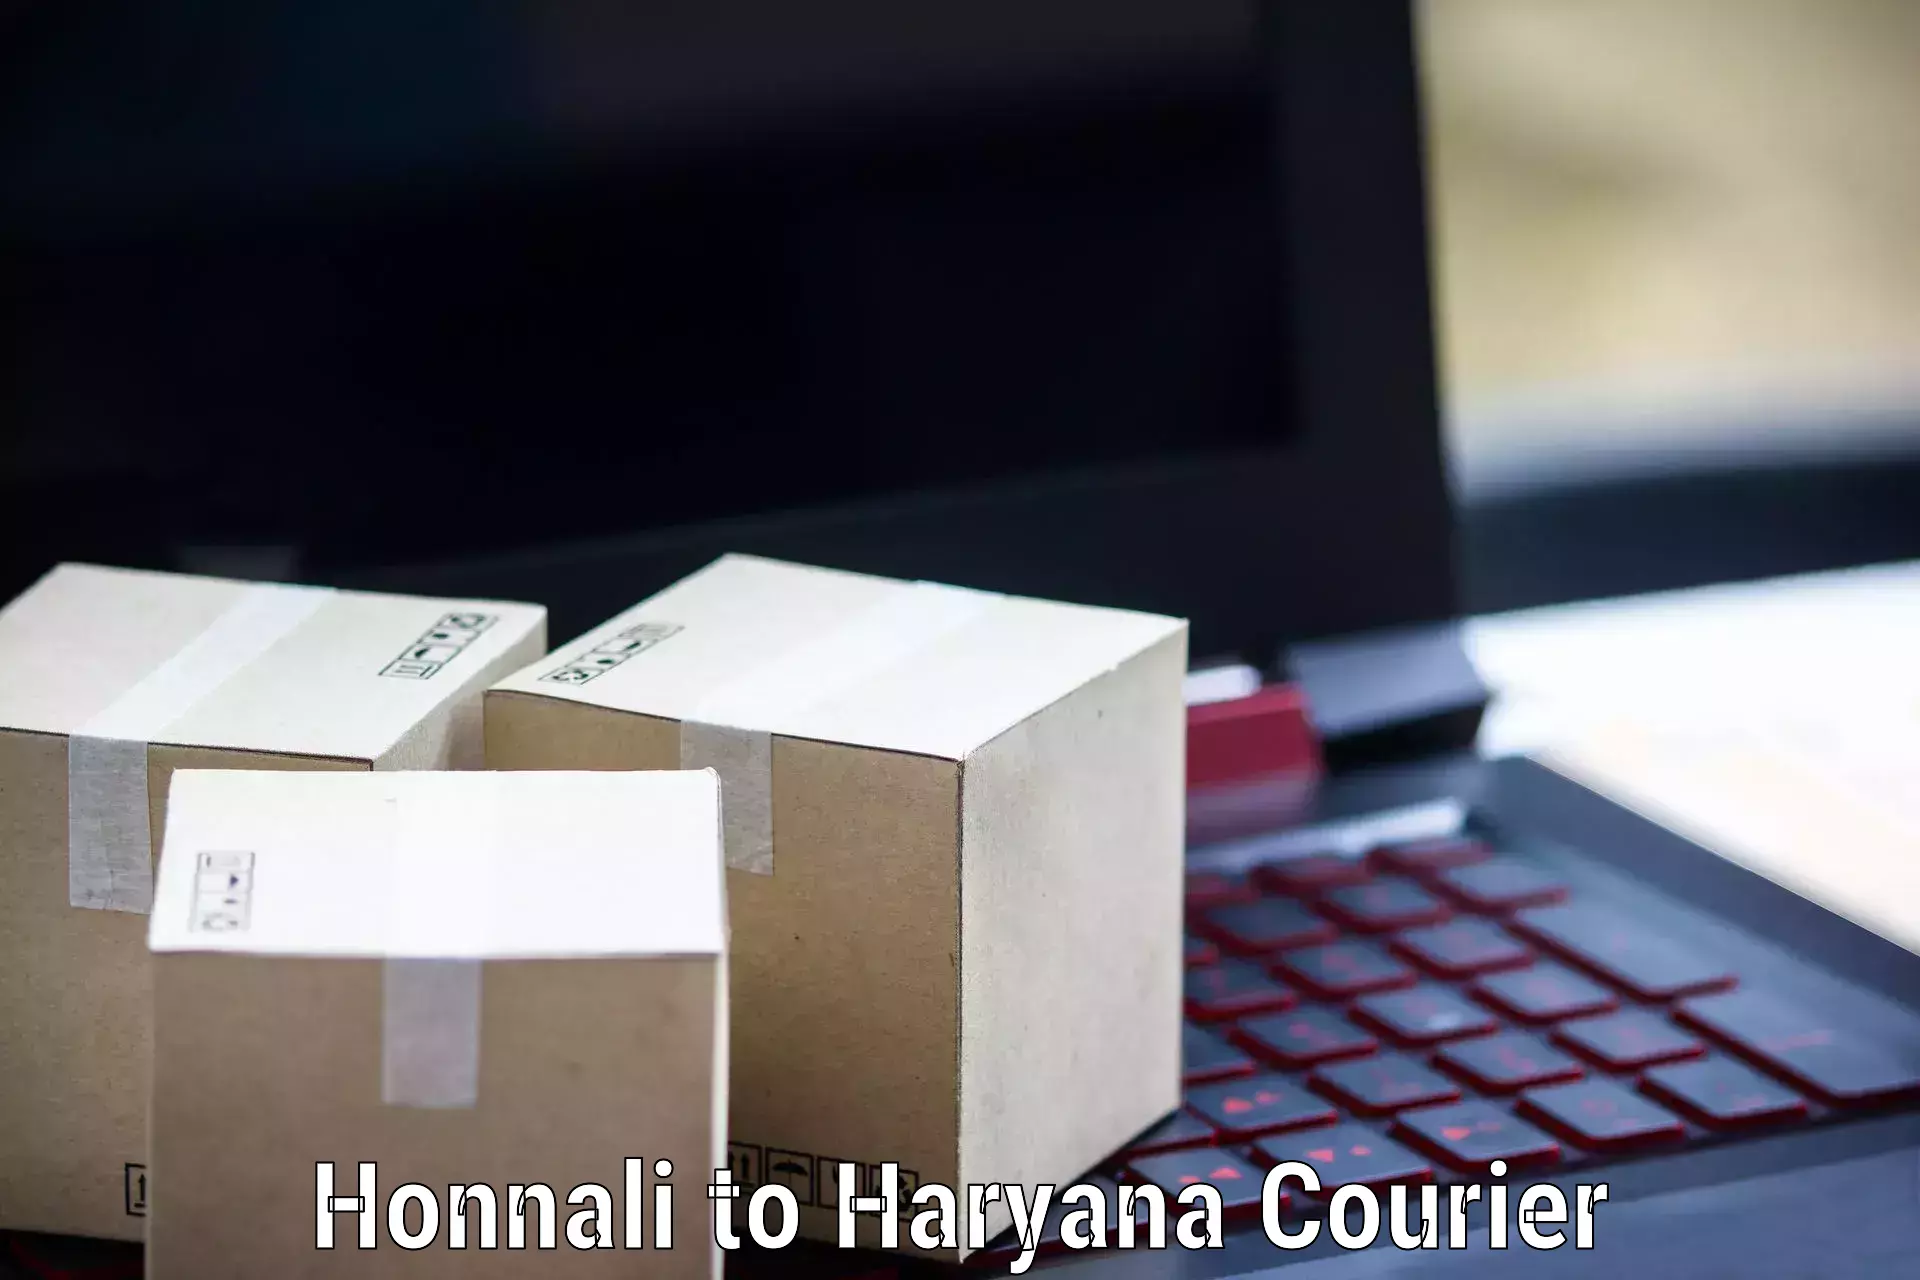 Customizable delivery plans Honnali to Odhan